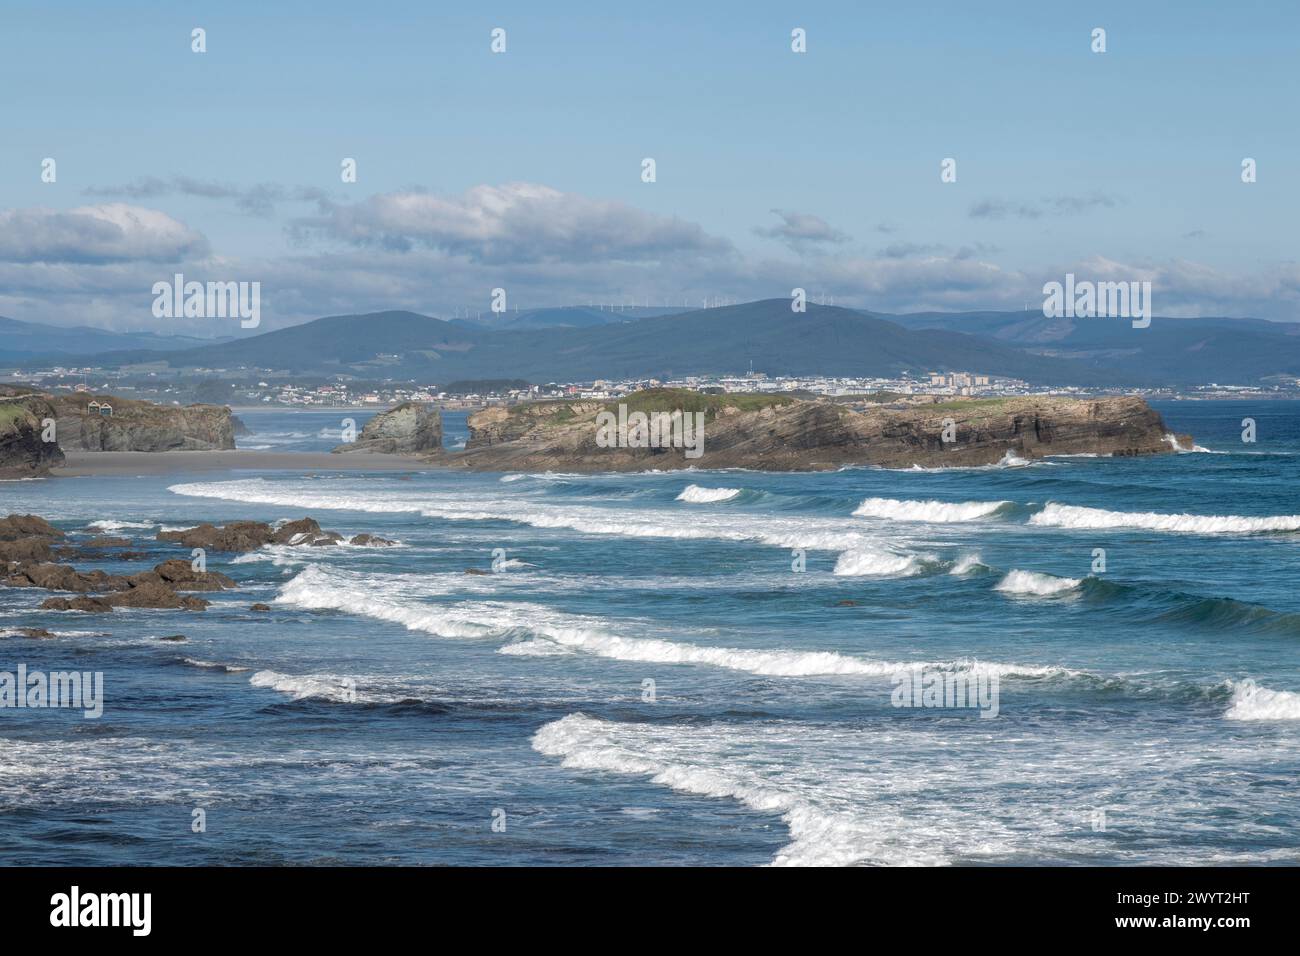 coastline, rocky shores, waves crashing, clear sky, distant mountains, peaceful exploration, untouched environment. Stock Photo